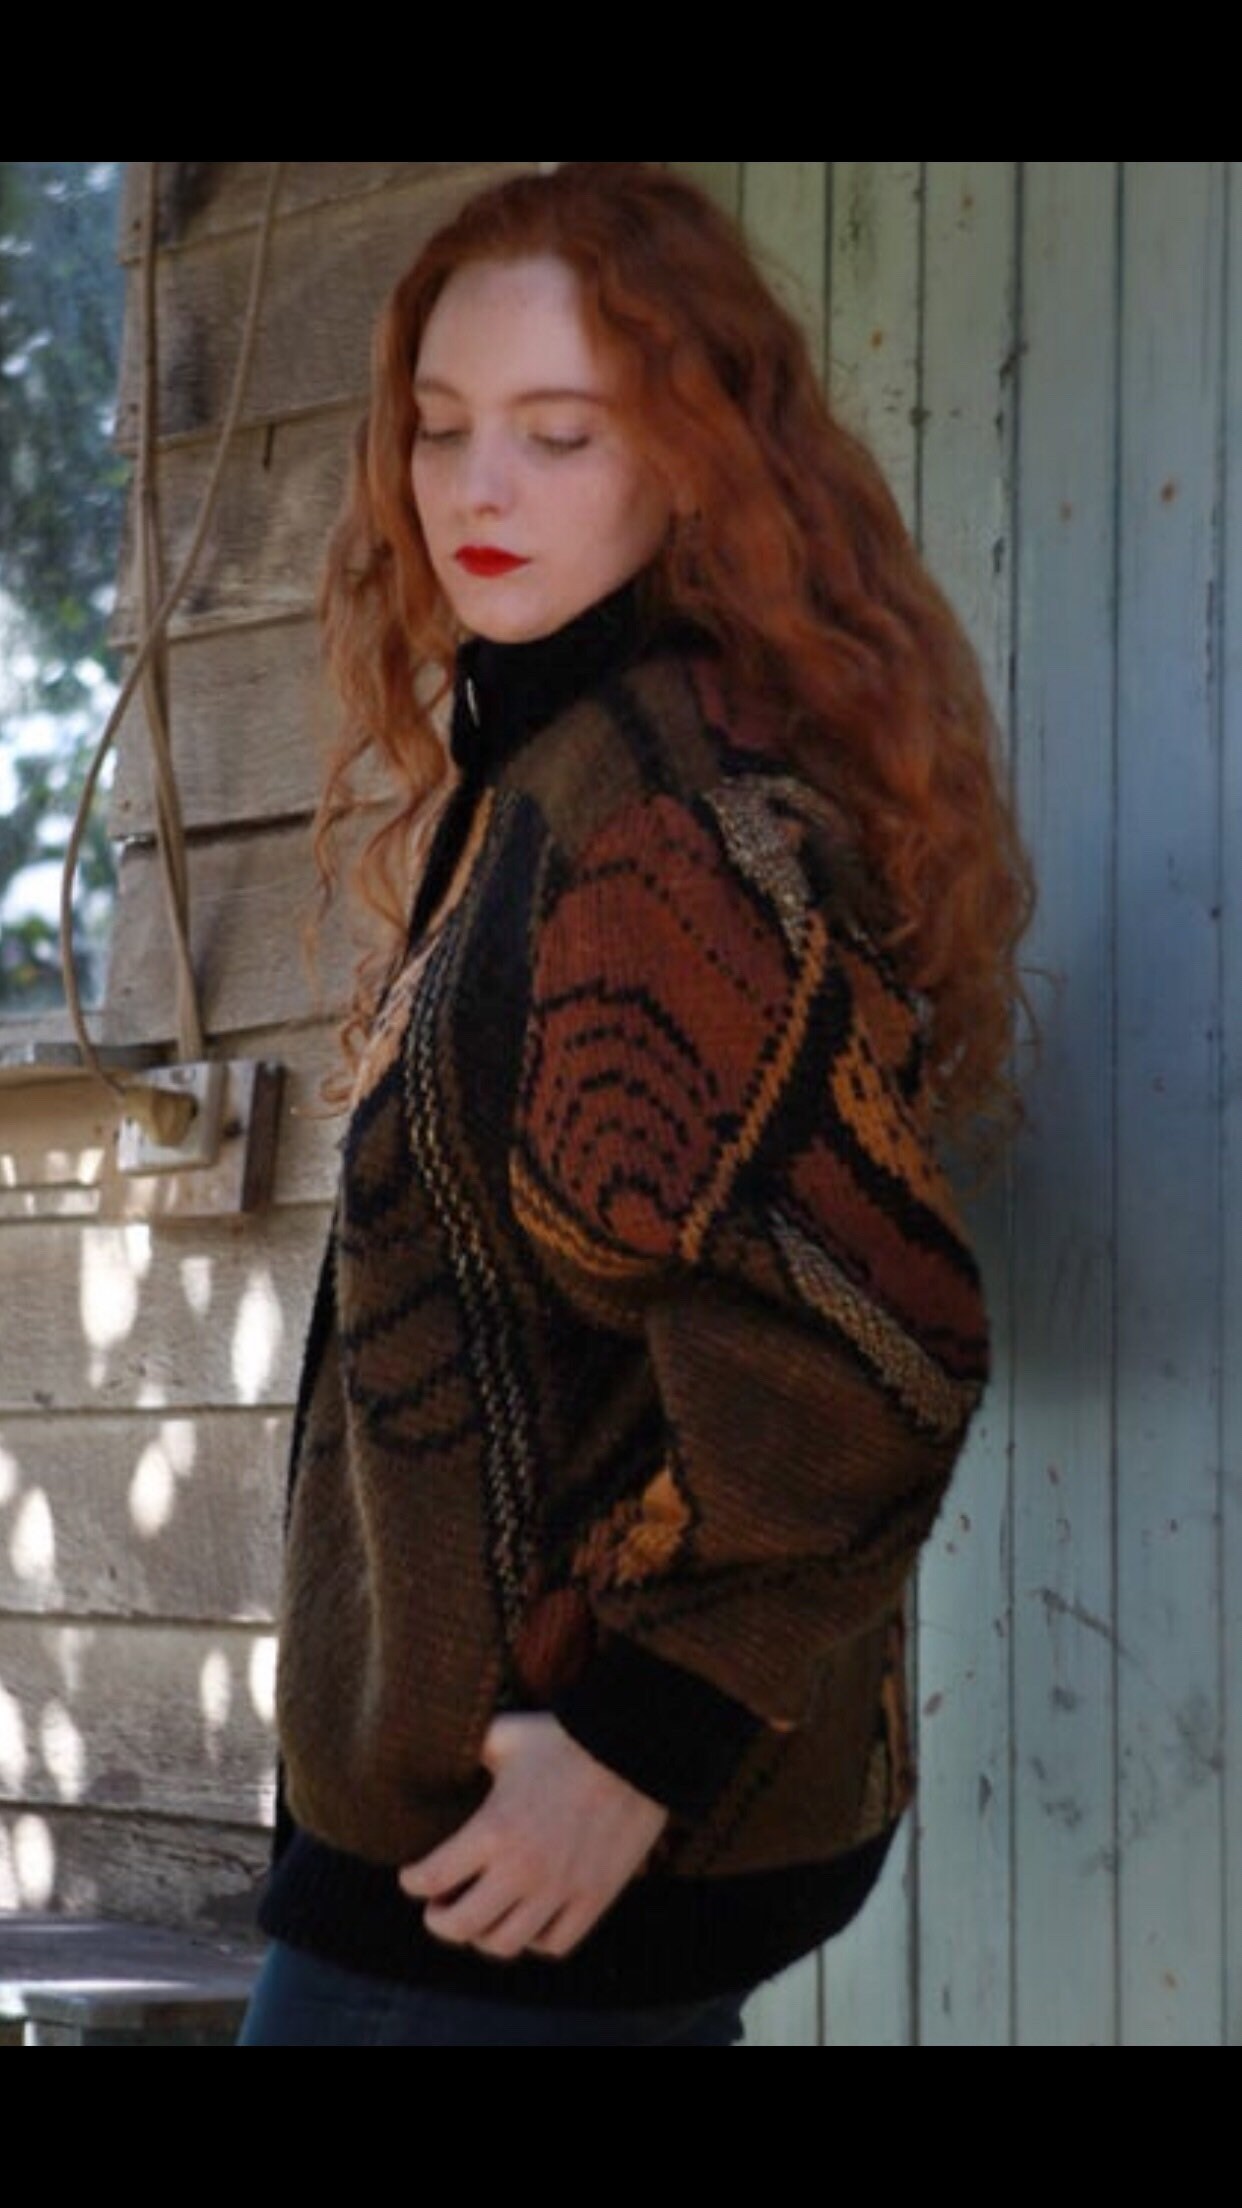 Mohair Blend Chunky Cocoon Knit Cardigan Jacket/Large Vintage Browns Bronze With Black Art Class Woollen Batwing 80S Sweater